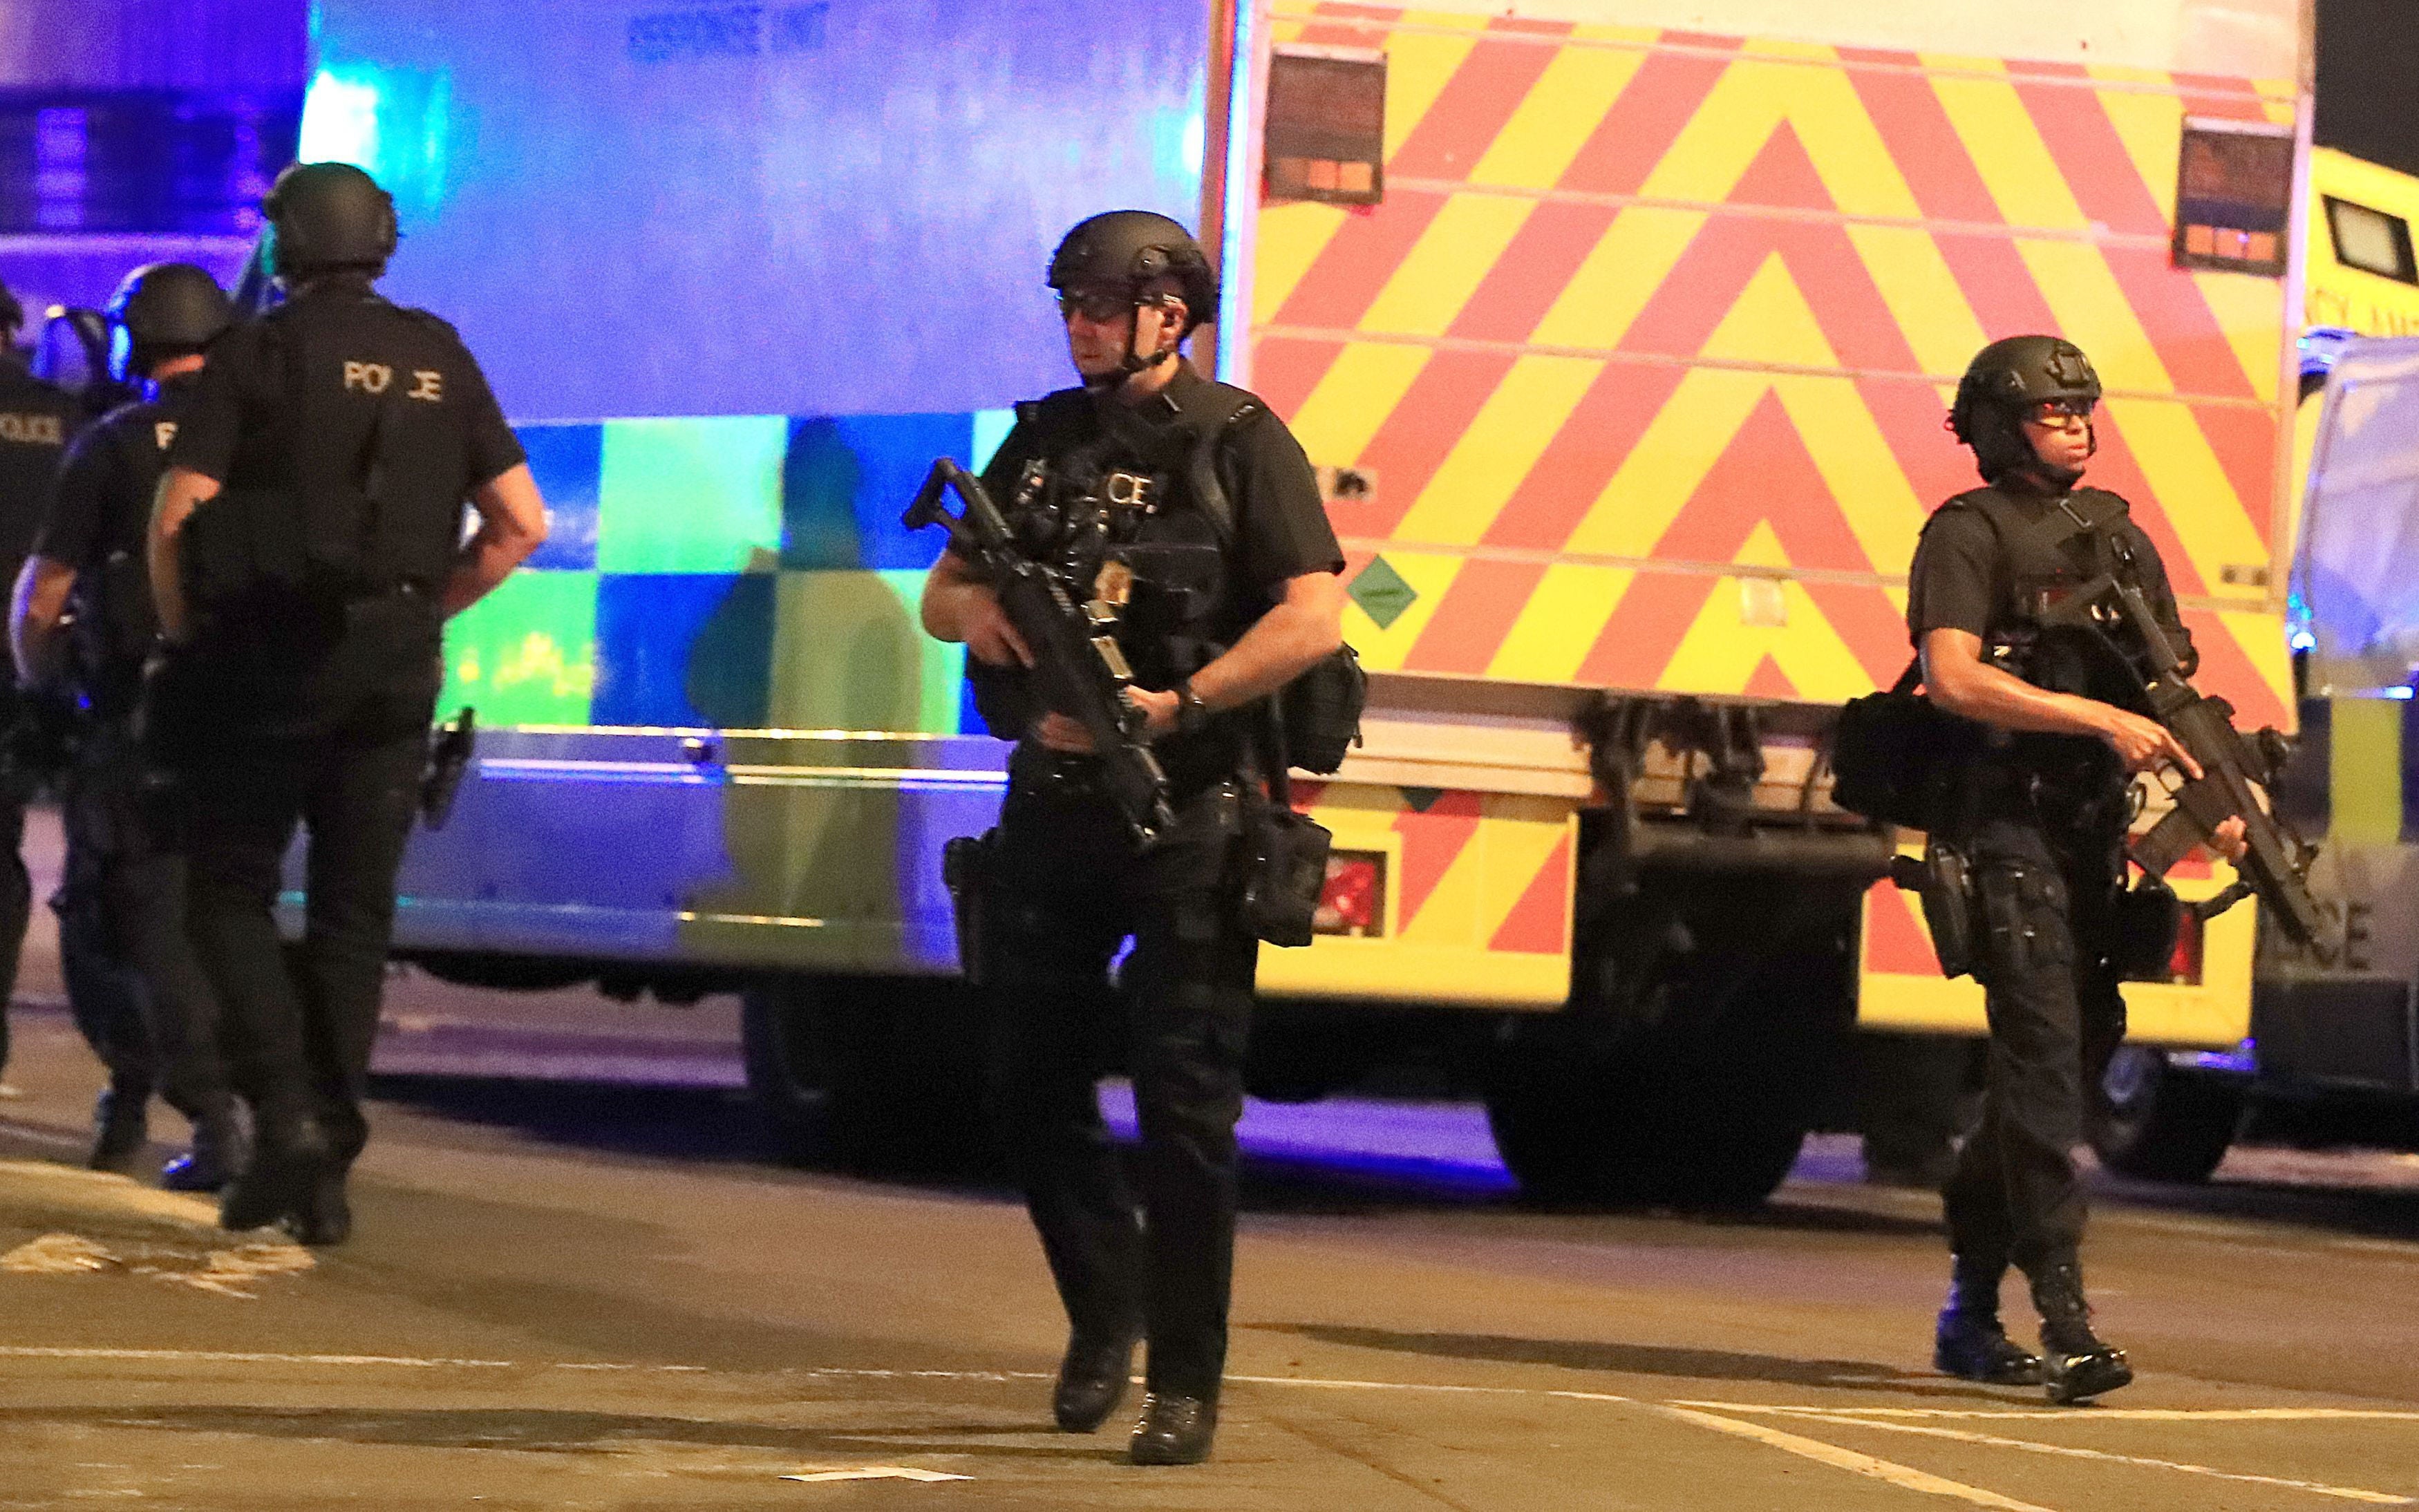 Armed police close to the Manchester Arena after the terror attack at an Ariana Grande concert in 2017